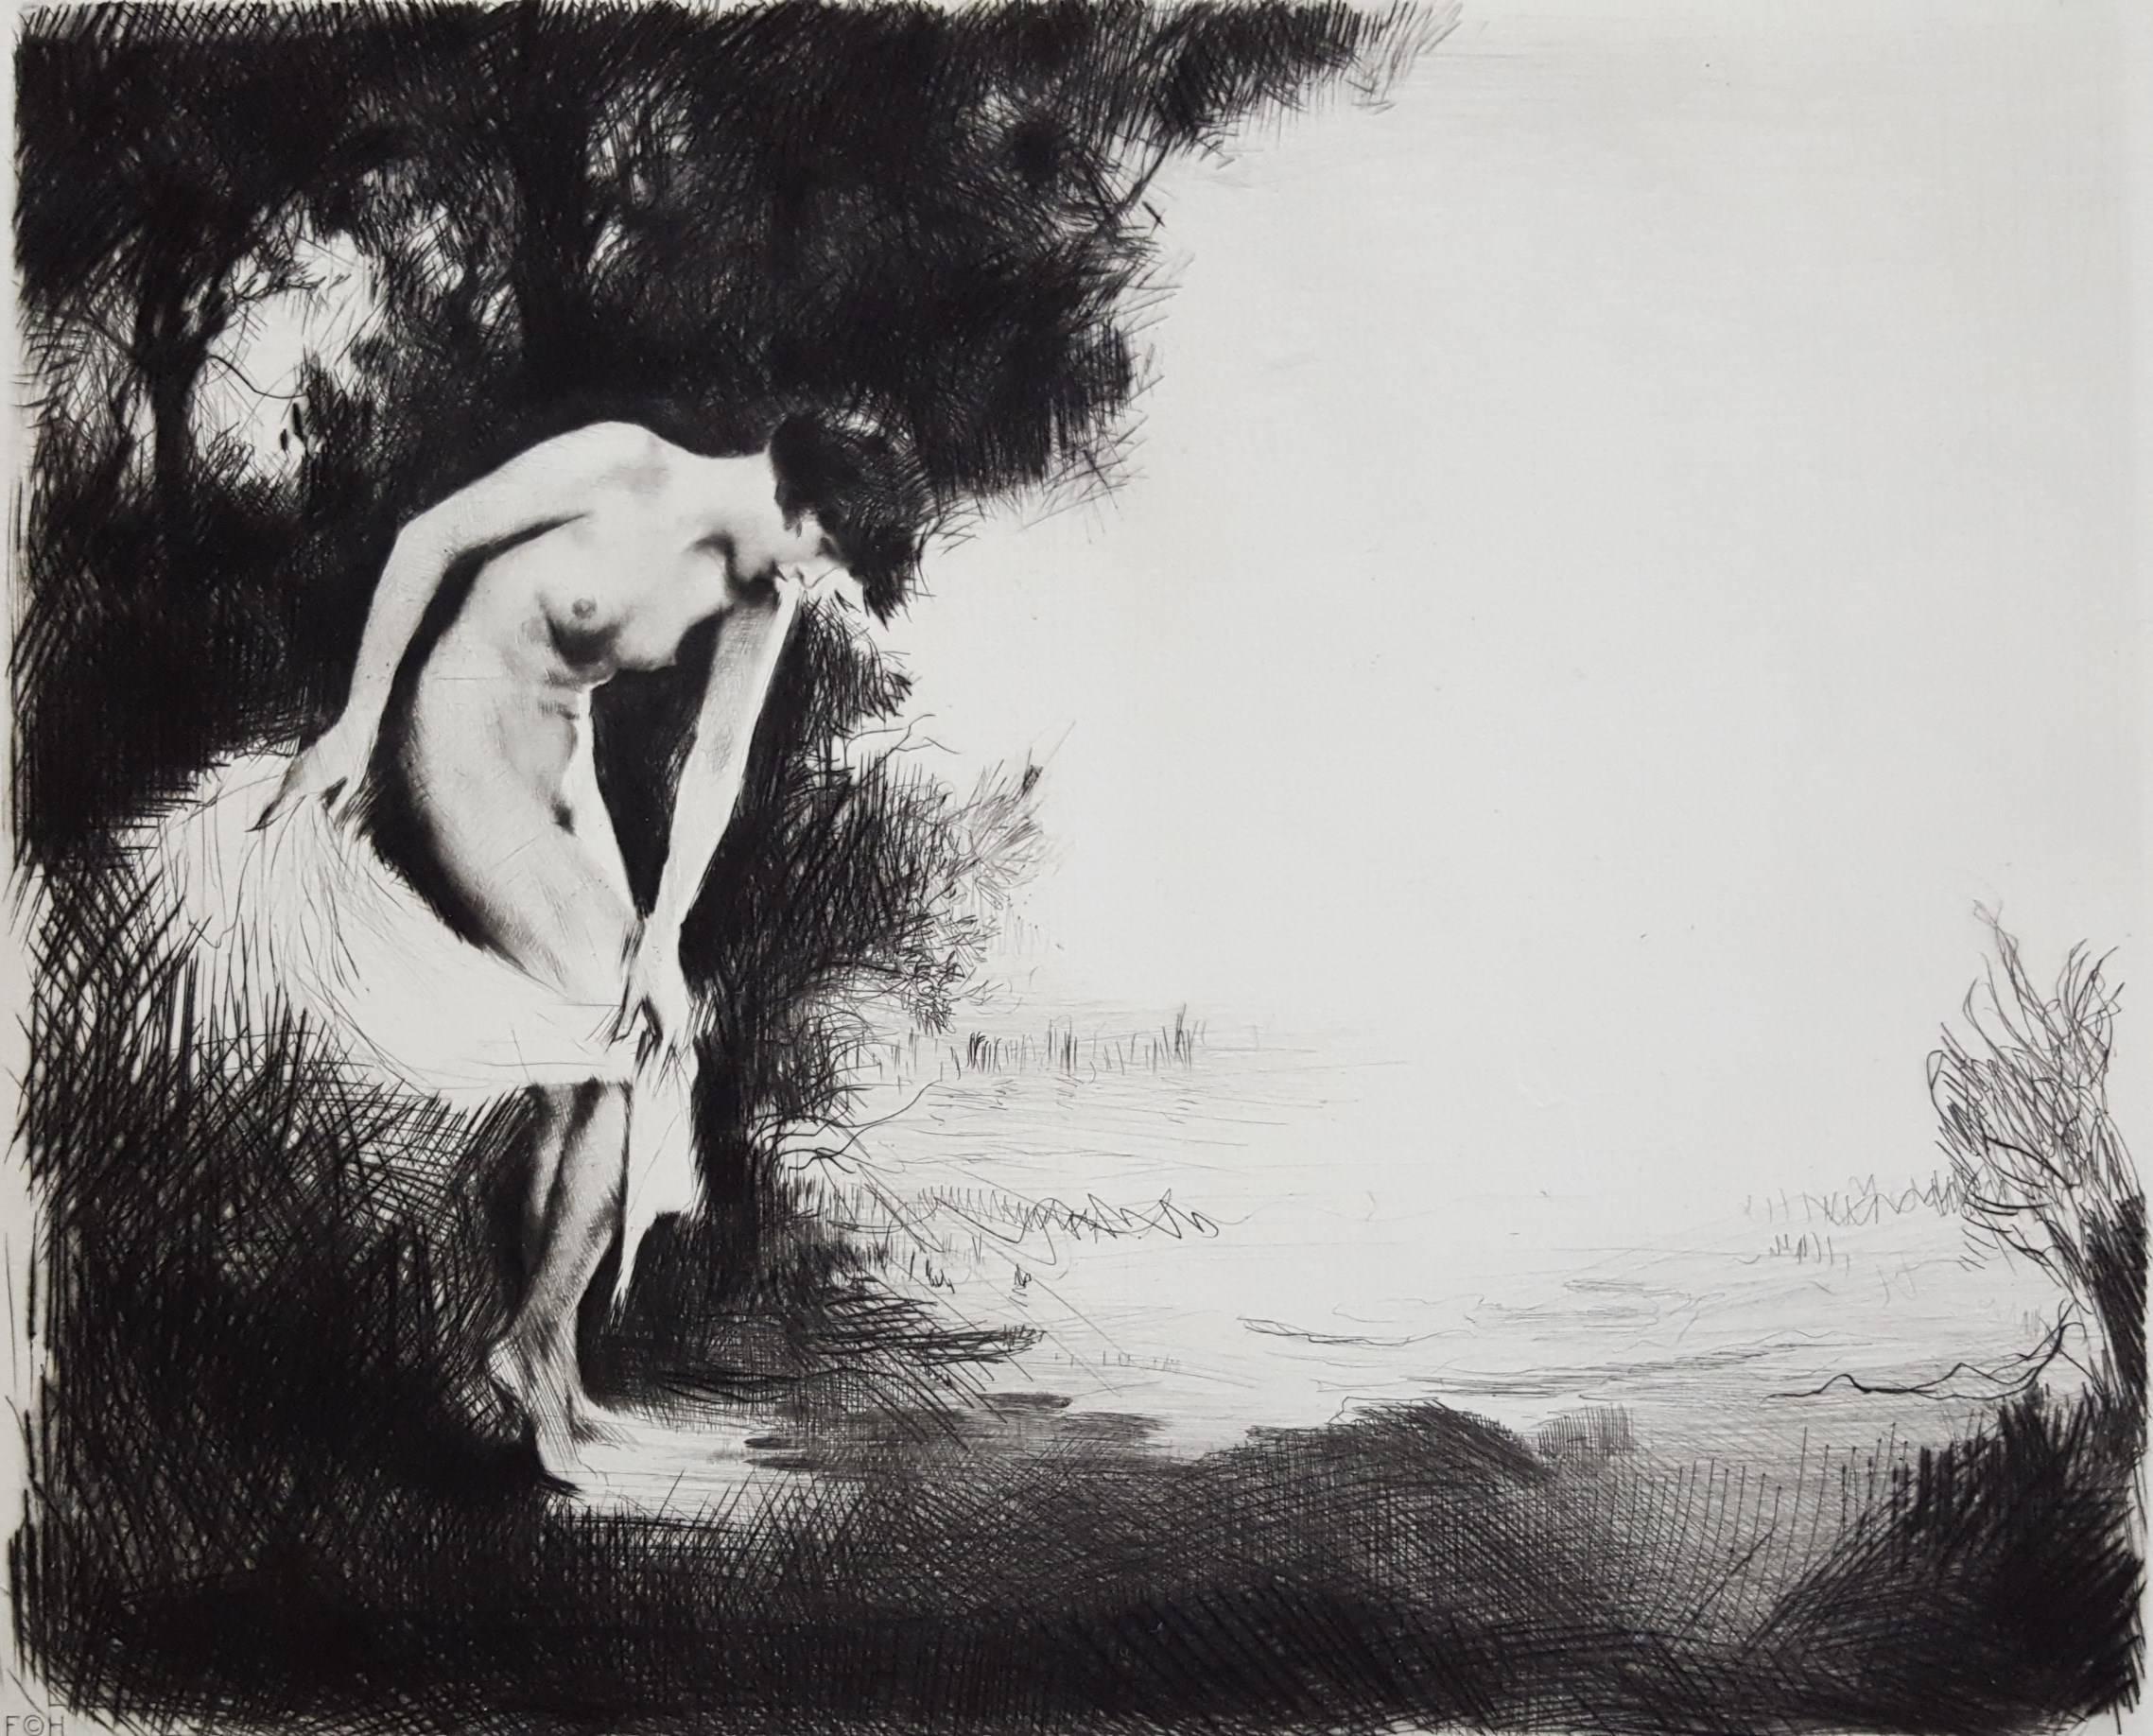 Nymph is nude in water